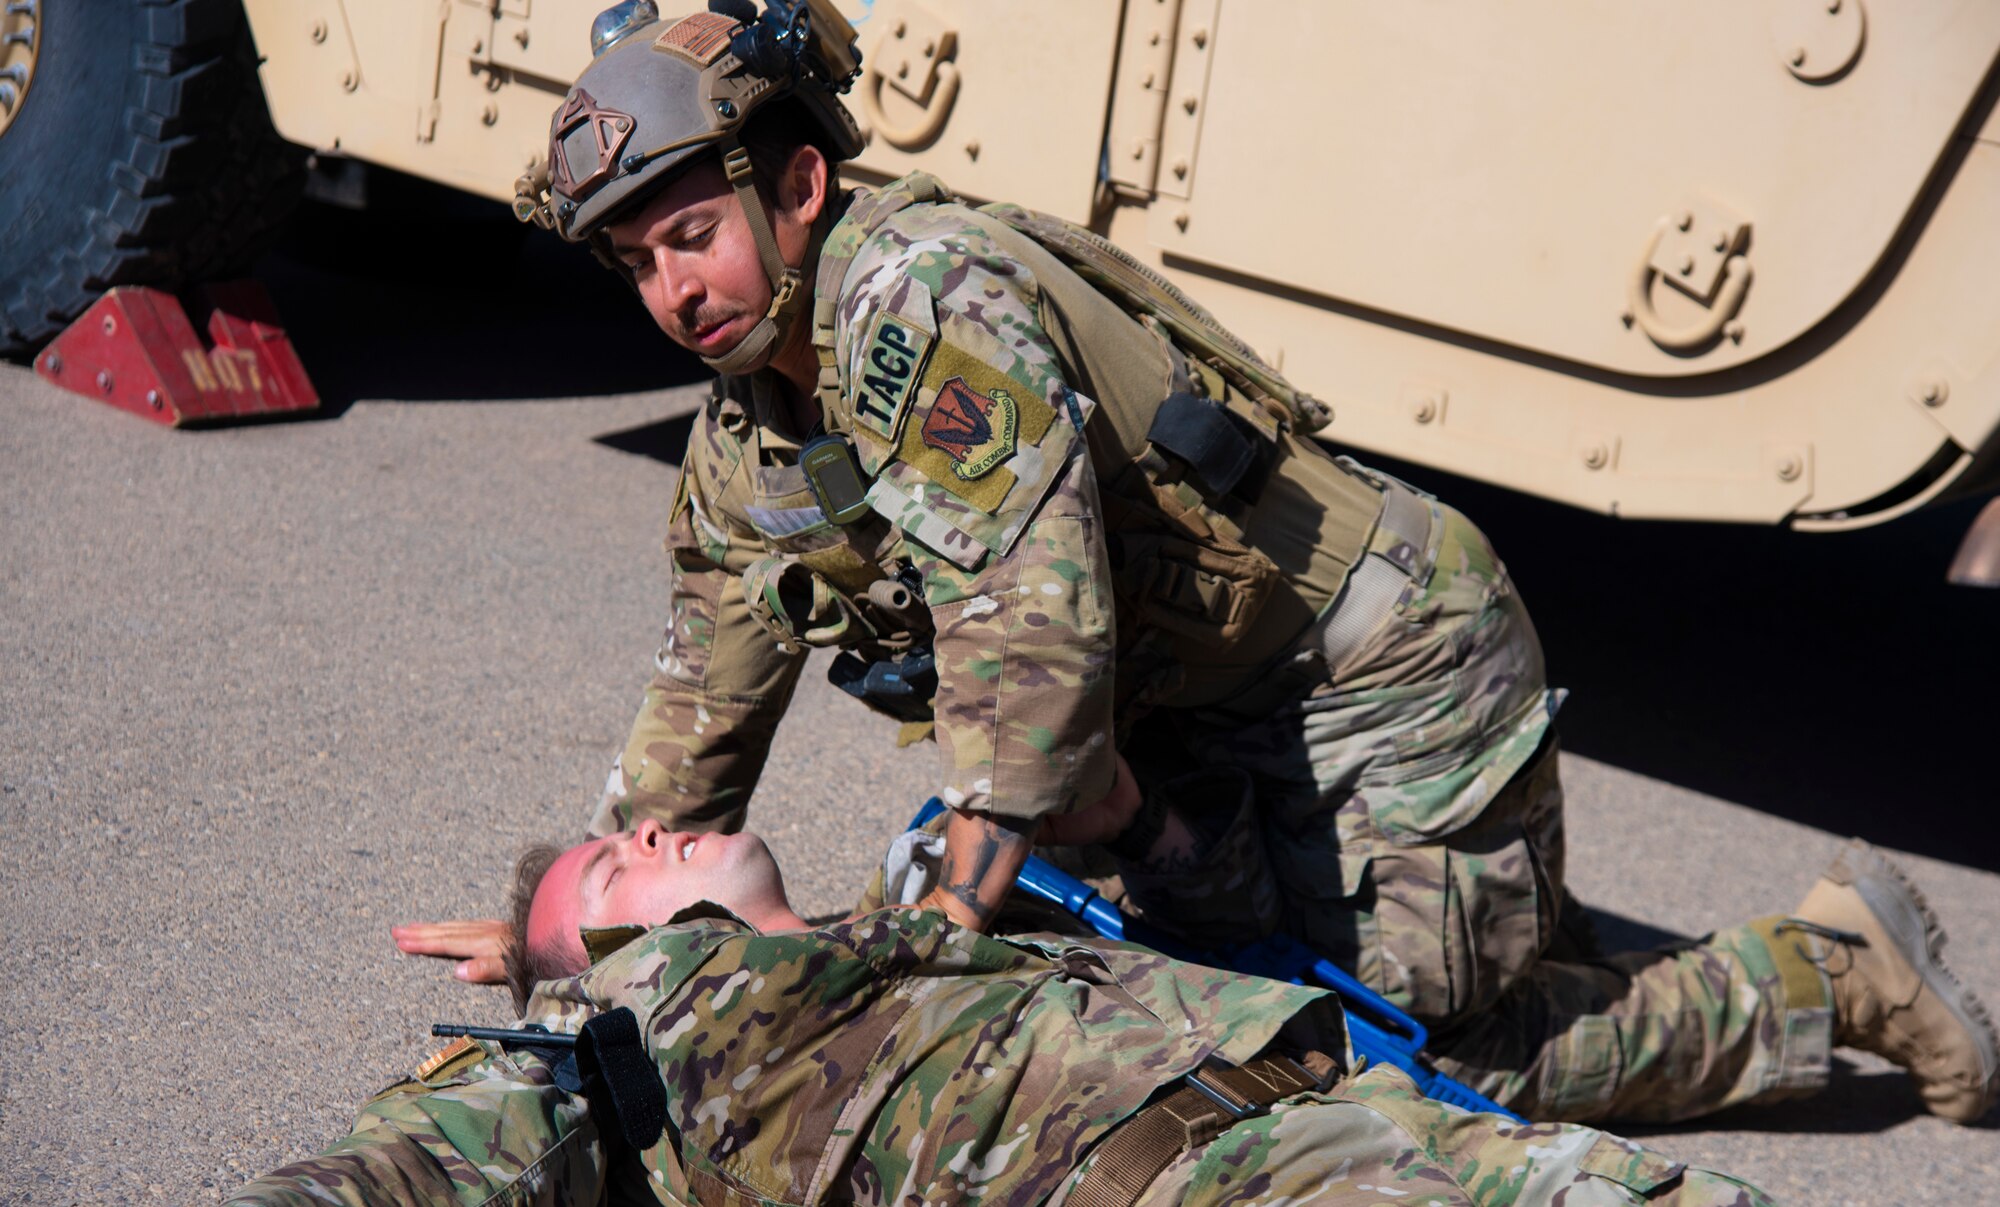 A U.S. Air Force Tactical Air Control Party specialist tends to a simulated casualty during a combat lifesaver skills scenario at the 2021 Wraith Challenge, April 23, 2021, on Fort Bliss, Texas. Combat lifesaver skills are emergency skills intended to treat casualties and prevent more life-threatening conditions until proper medical units can arrive. (U.S. Air Force photo by Airman 1st Class Jessica Sanchez)